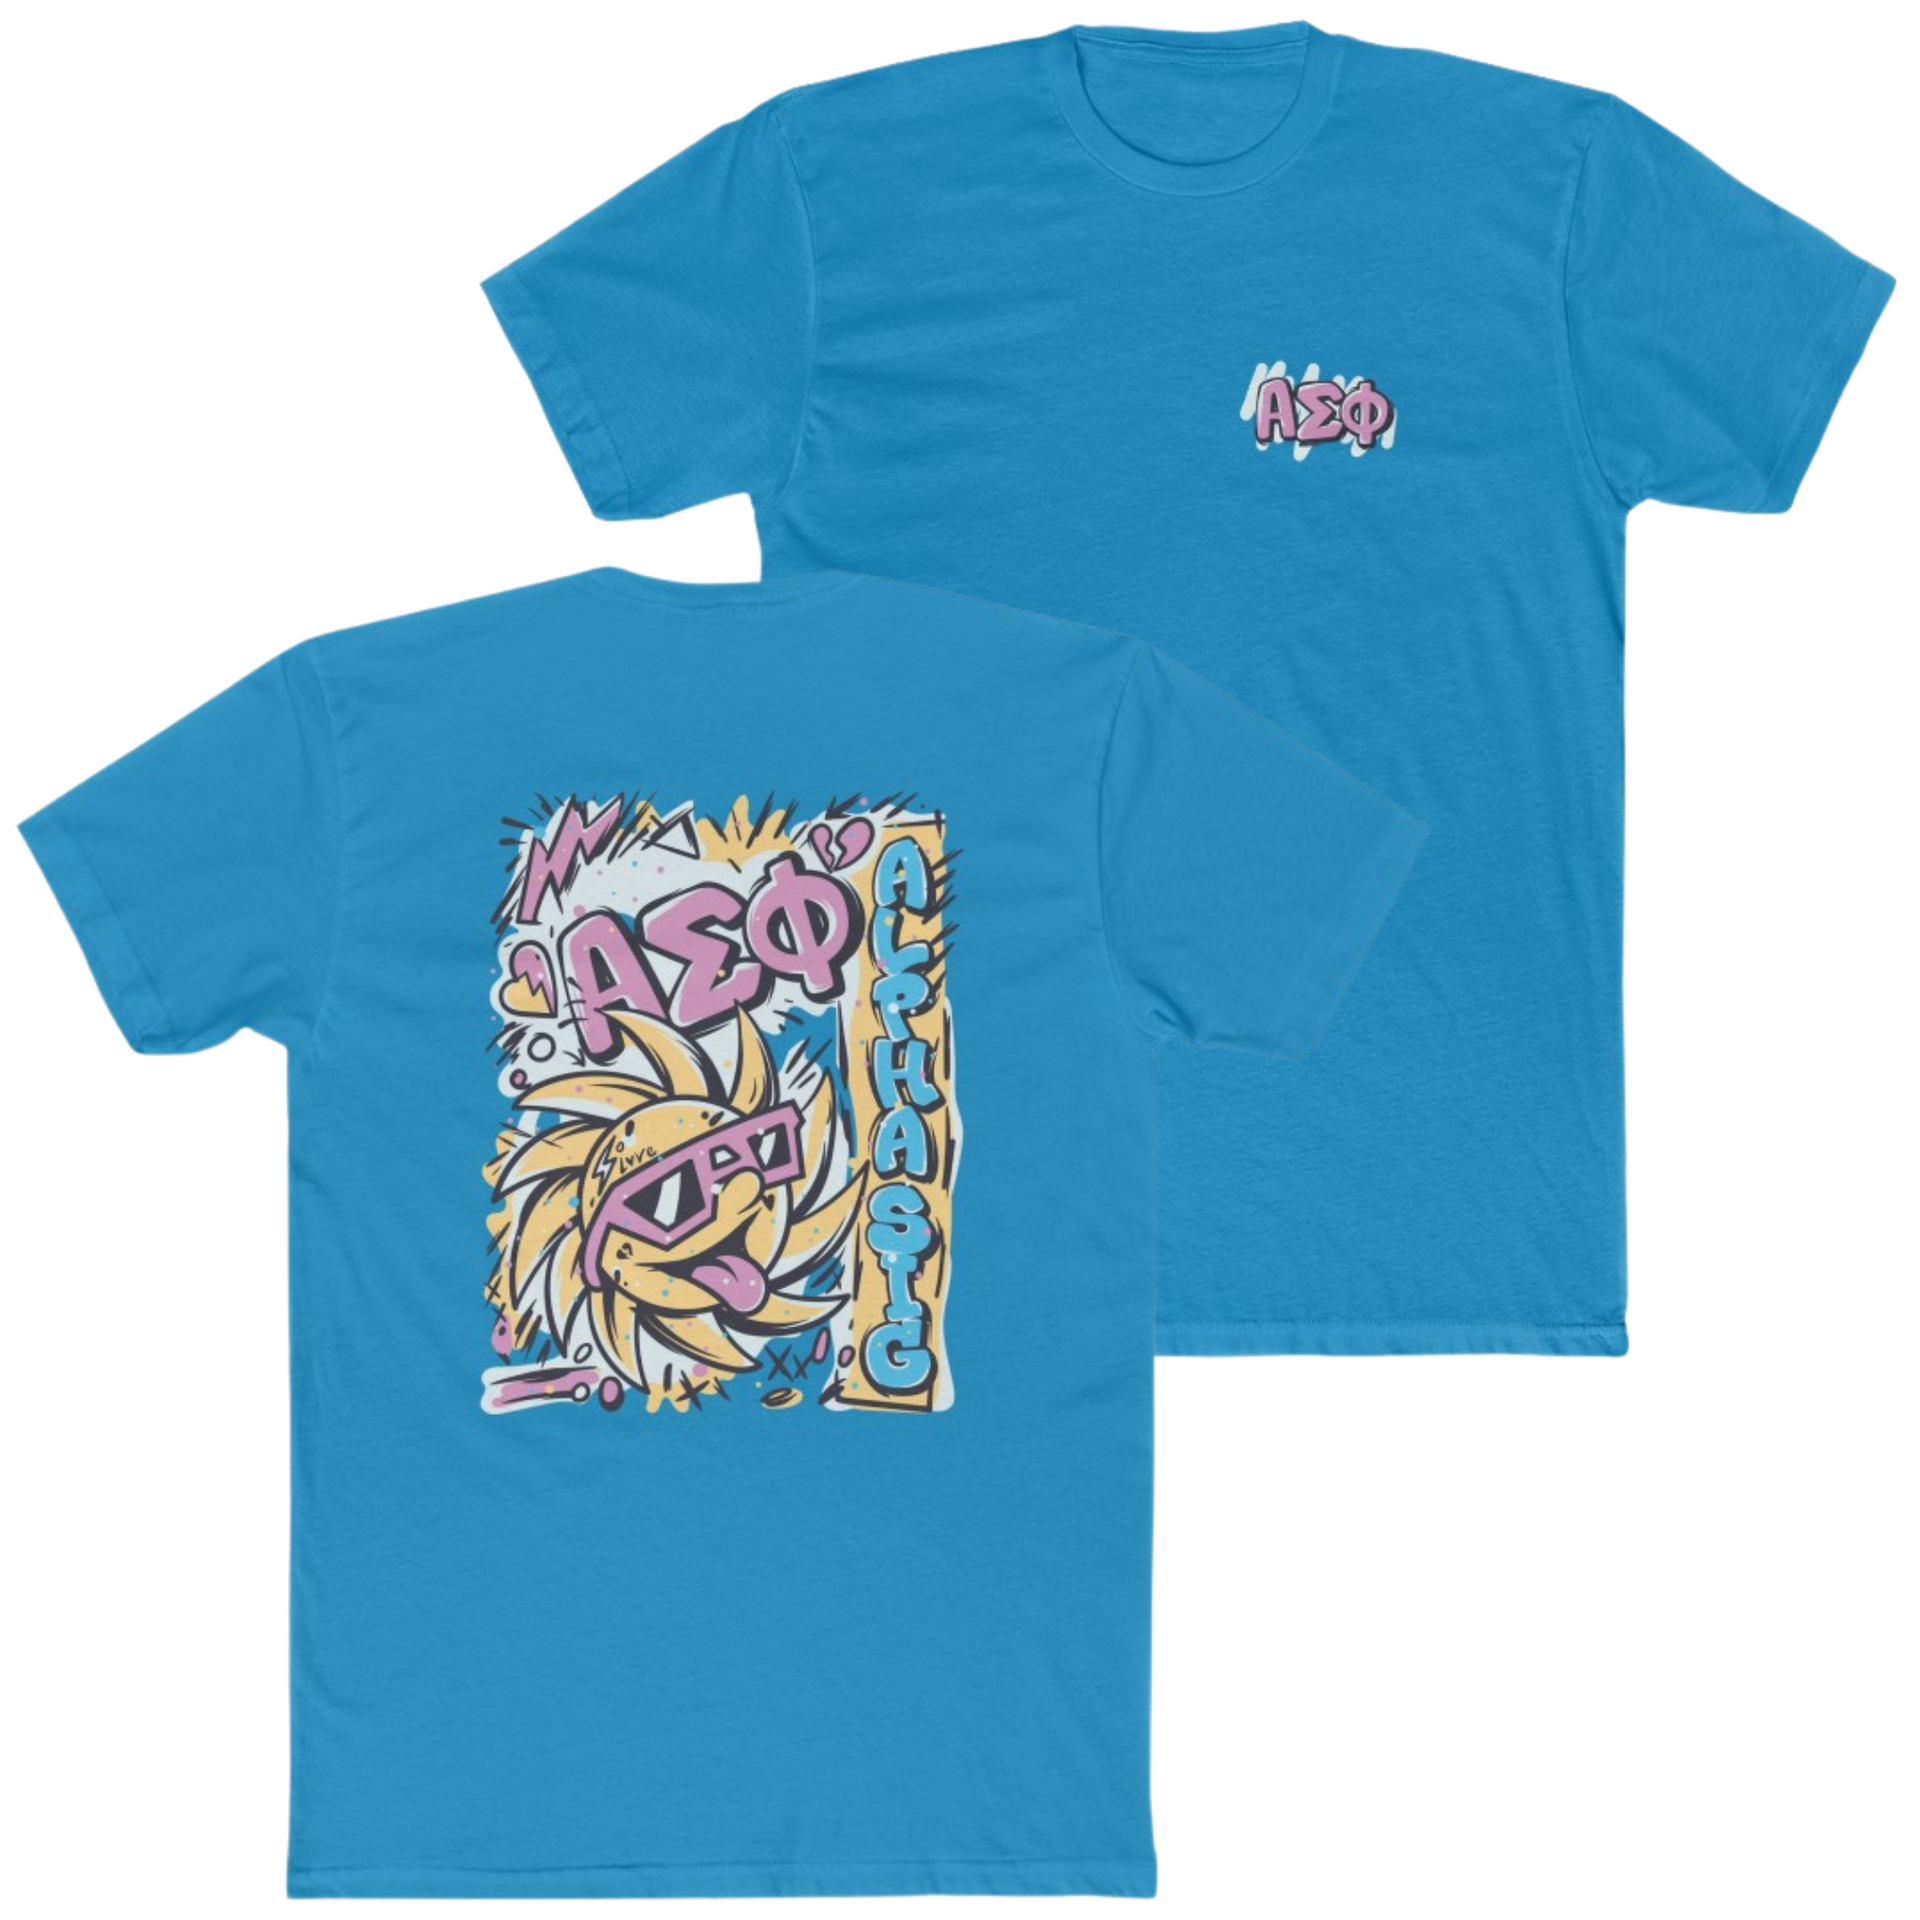 Turquoise Alpha Sigma Phi Graphic T-Shirt | Fun in the Sun | Fraternity Shirt 